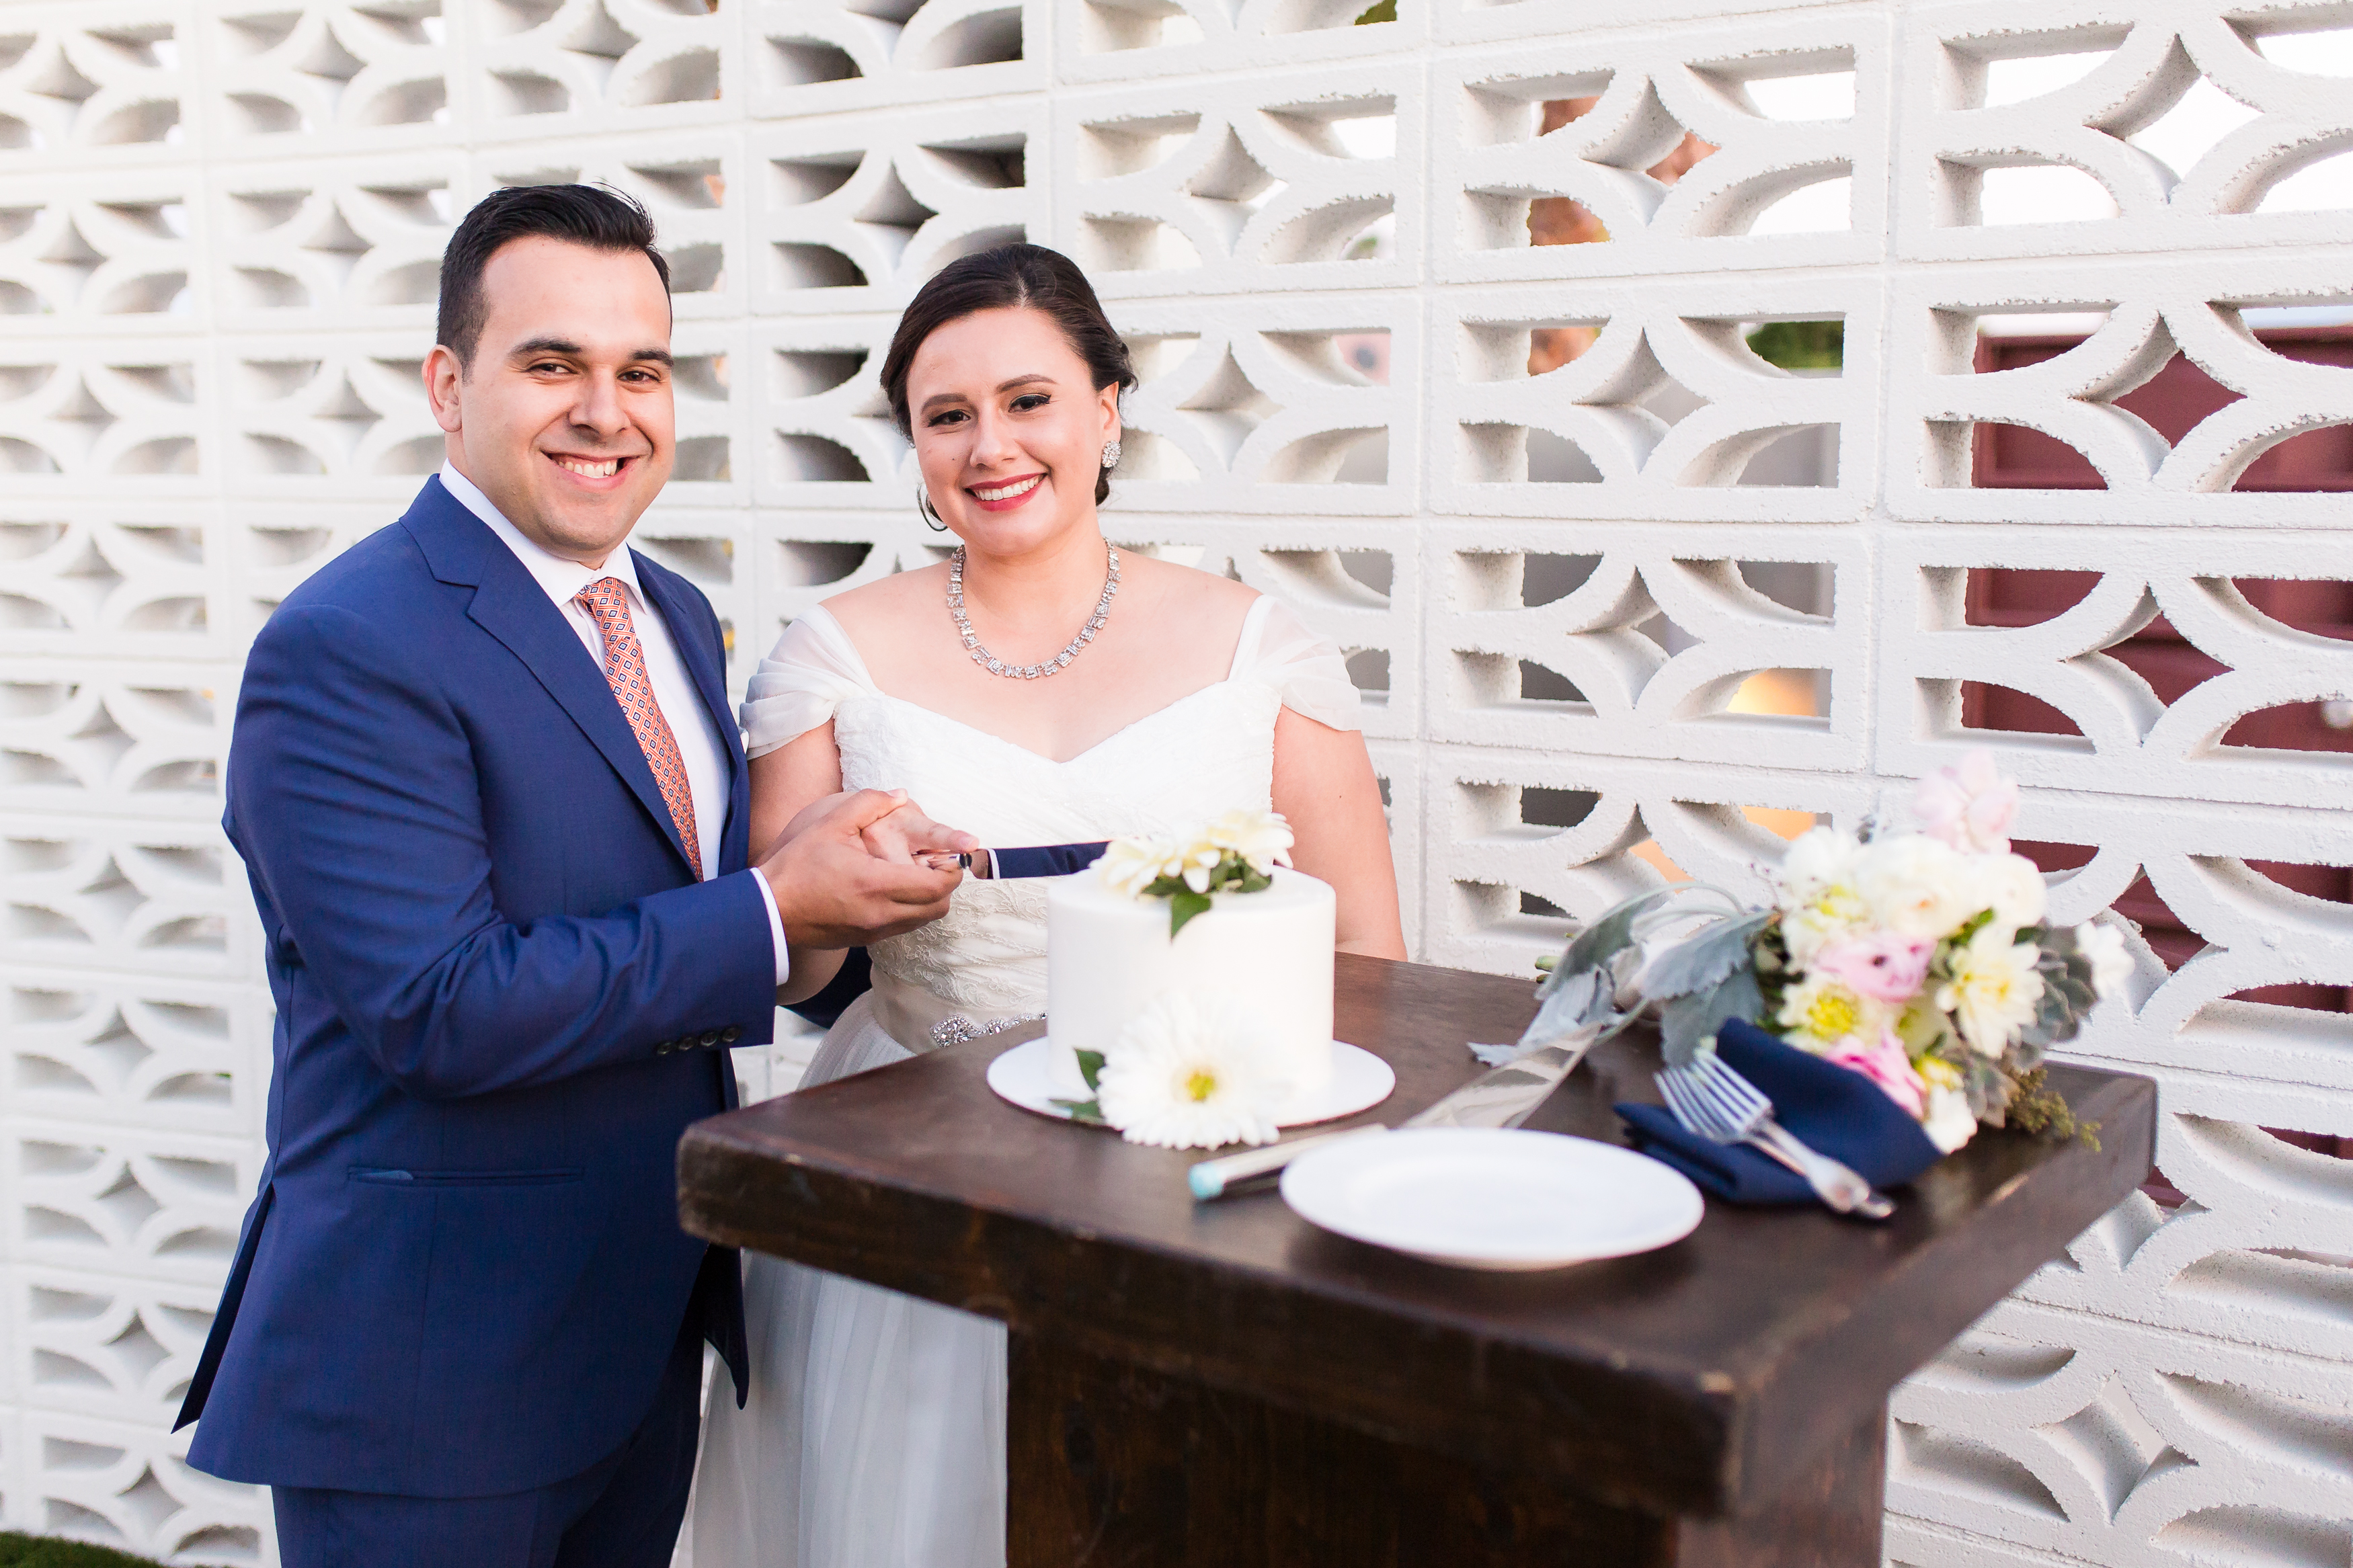 Bride and groom cut small white wedding cake during outdoor reception